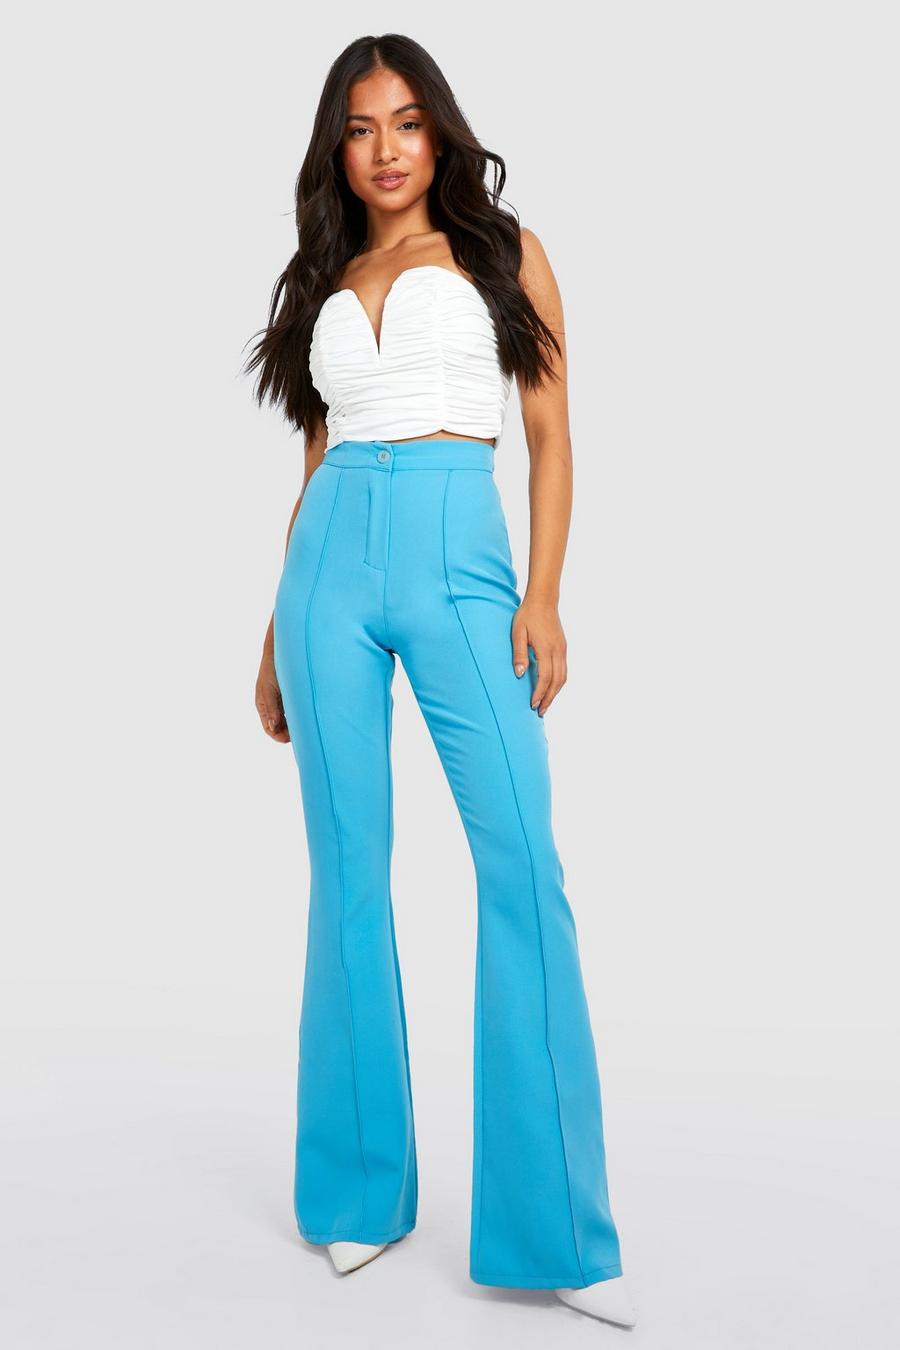 Turquoise Petite Seam Detail Flared Dress Pants image number 1